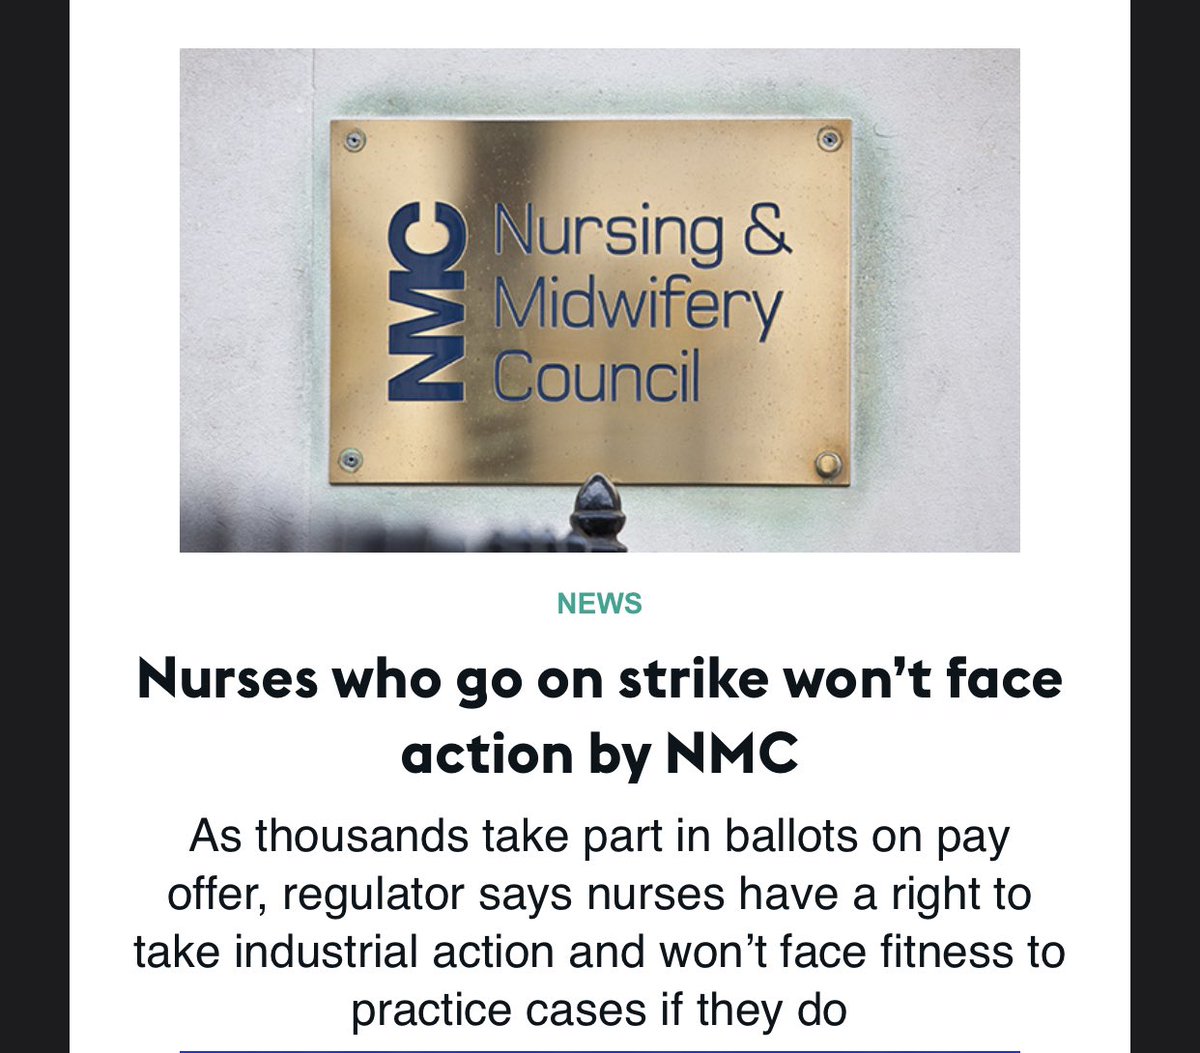 #IWillVote - the ballot will be arriving in 2 weeks #checkyourdetails to ensure that they are correct for you to have your say. For anyone struggling with what industrial action would mean for them please note 👇#FairPayForNursing @RCNScot @theRCN